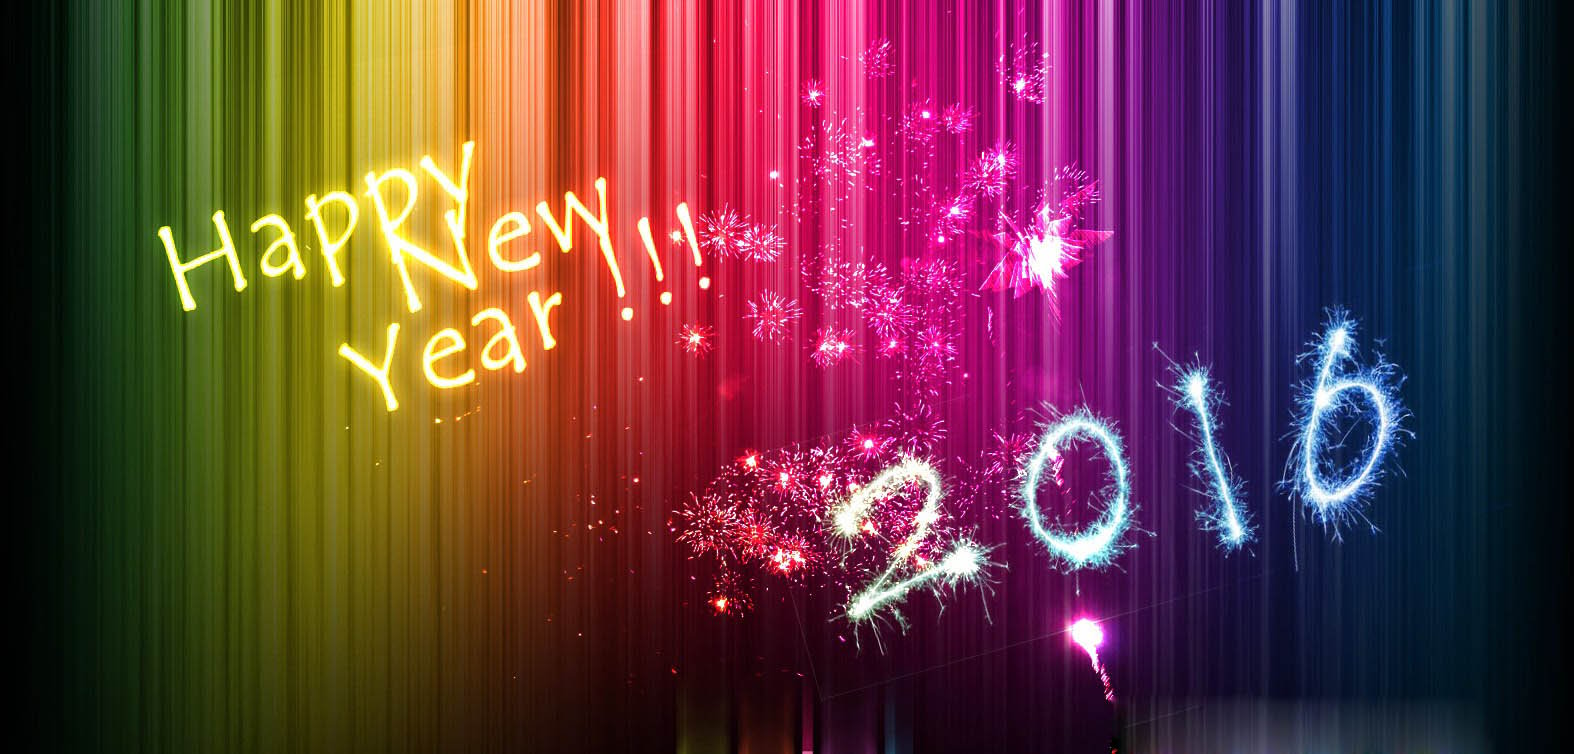 Happy New Year HD Wallpaper New Year Images Happy New Year 2016 1574x754